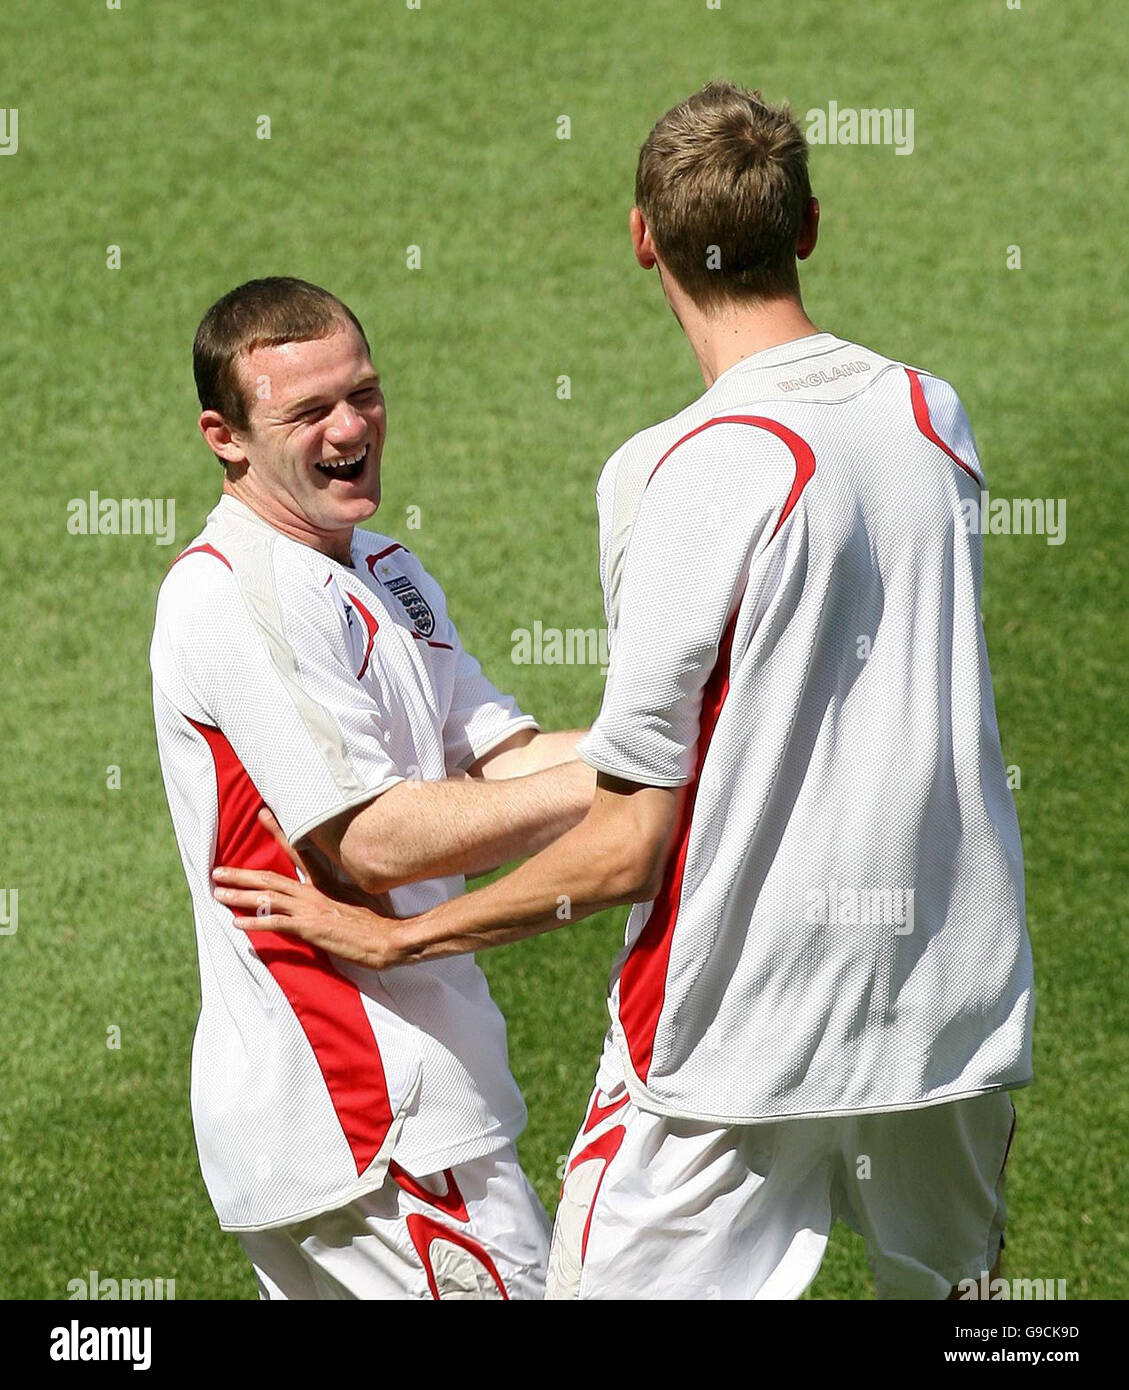 England's Wayne Rooney (left) shares a joke with Peter Crouch during a training session at the Gottlieb Daimler Stadion, Stuttgart, Germany. Stock Photo